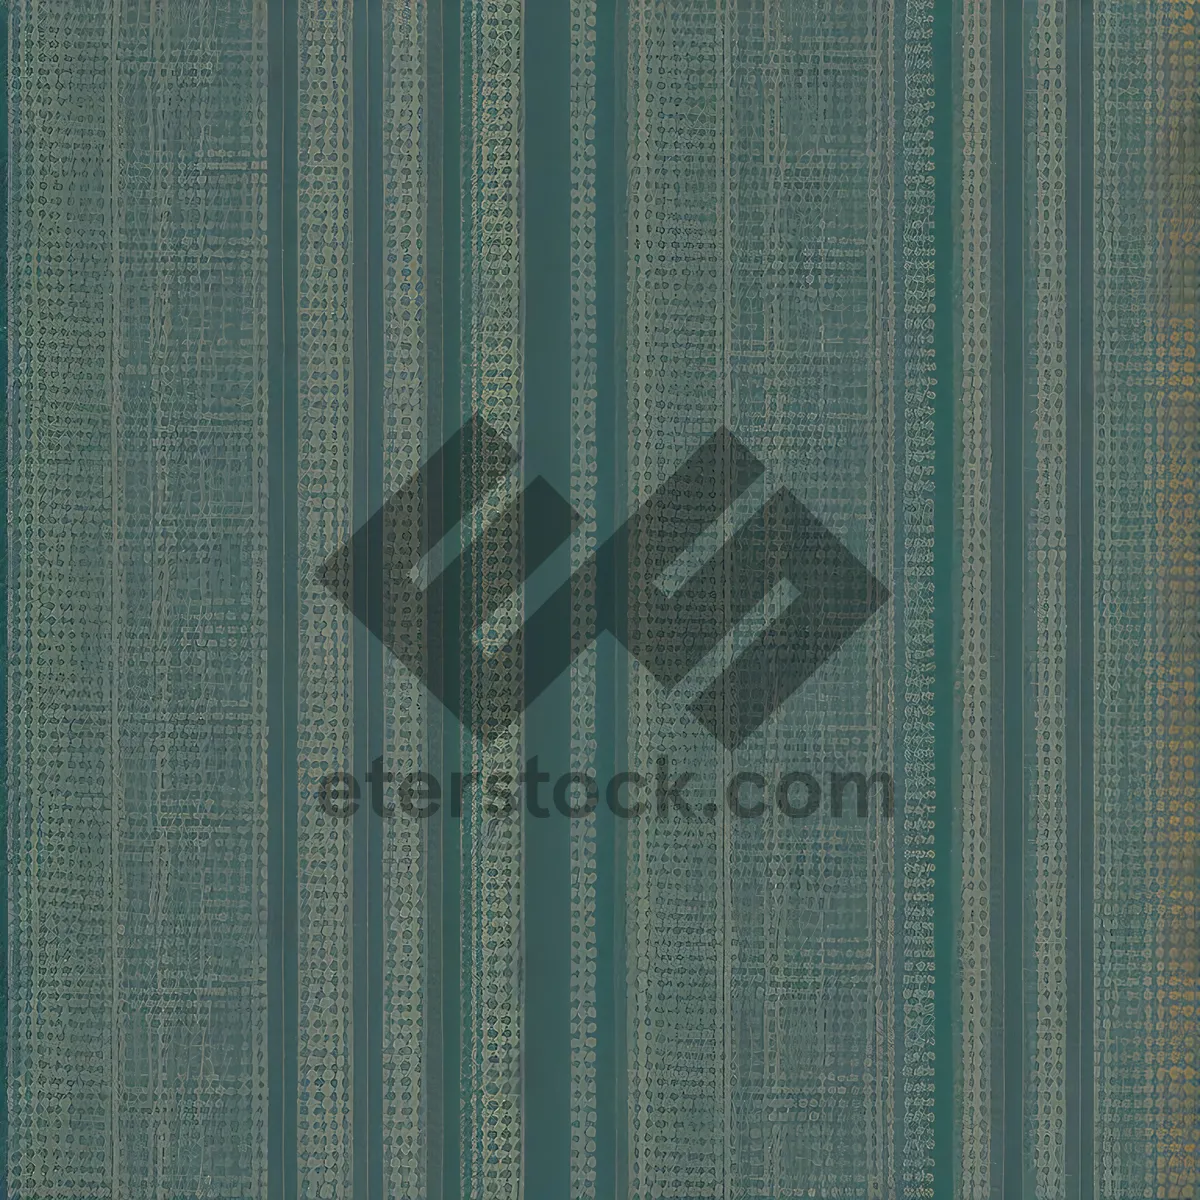 Picture of Textured Fabric Weave - Artistic Seamless Background